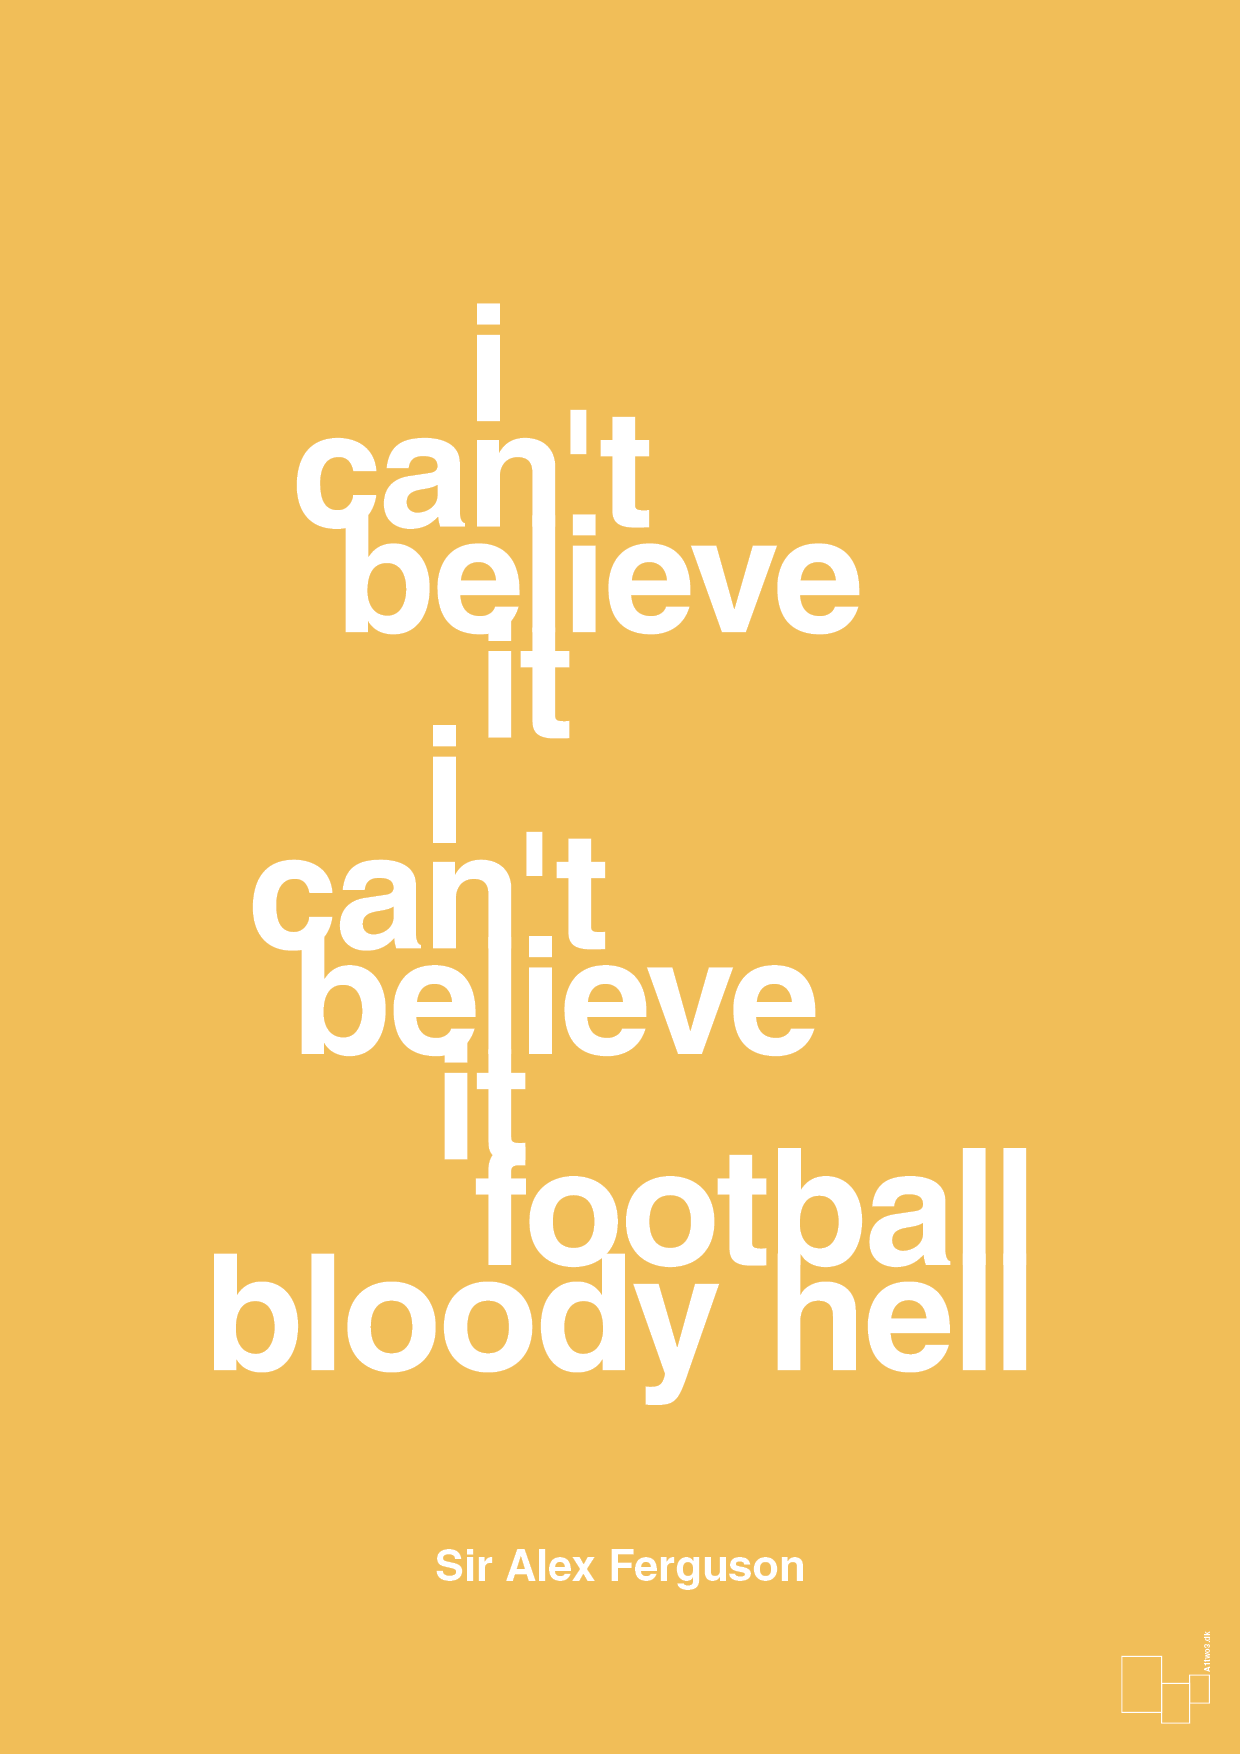 i can't believe it i can't believe it football bloody hell - Plakat med Citater i Honeycomb